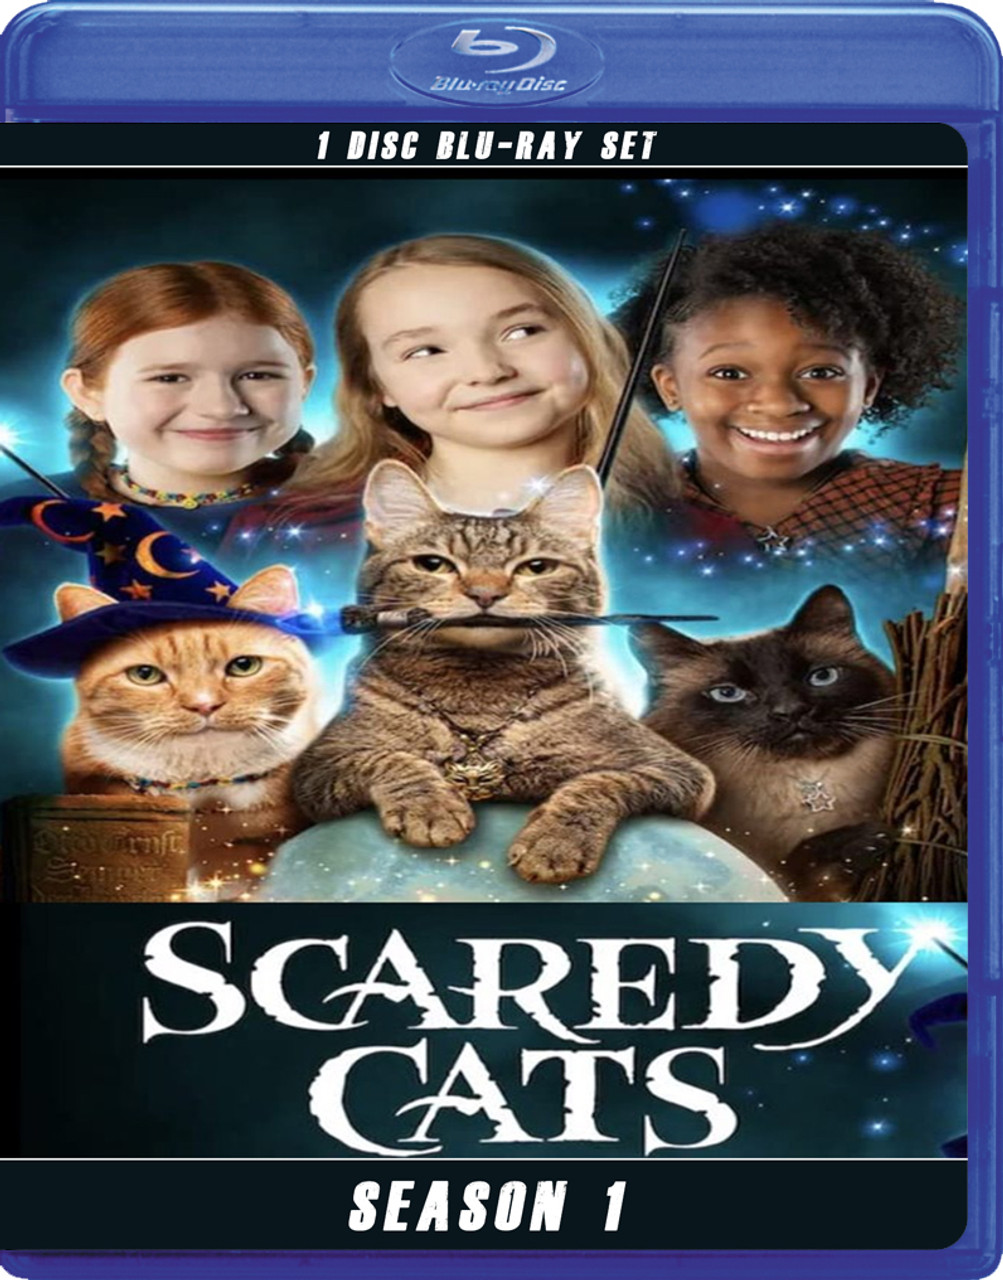 Scaredy Cats Sign 